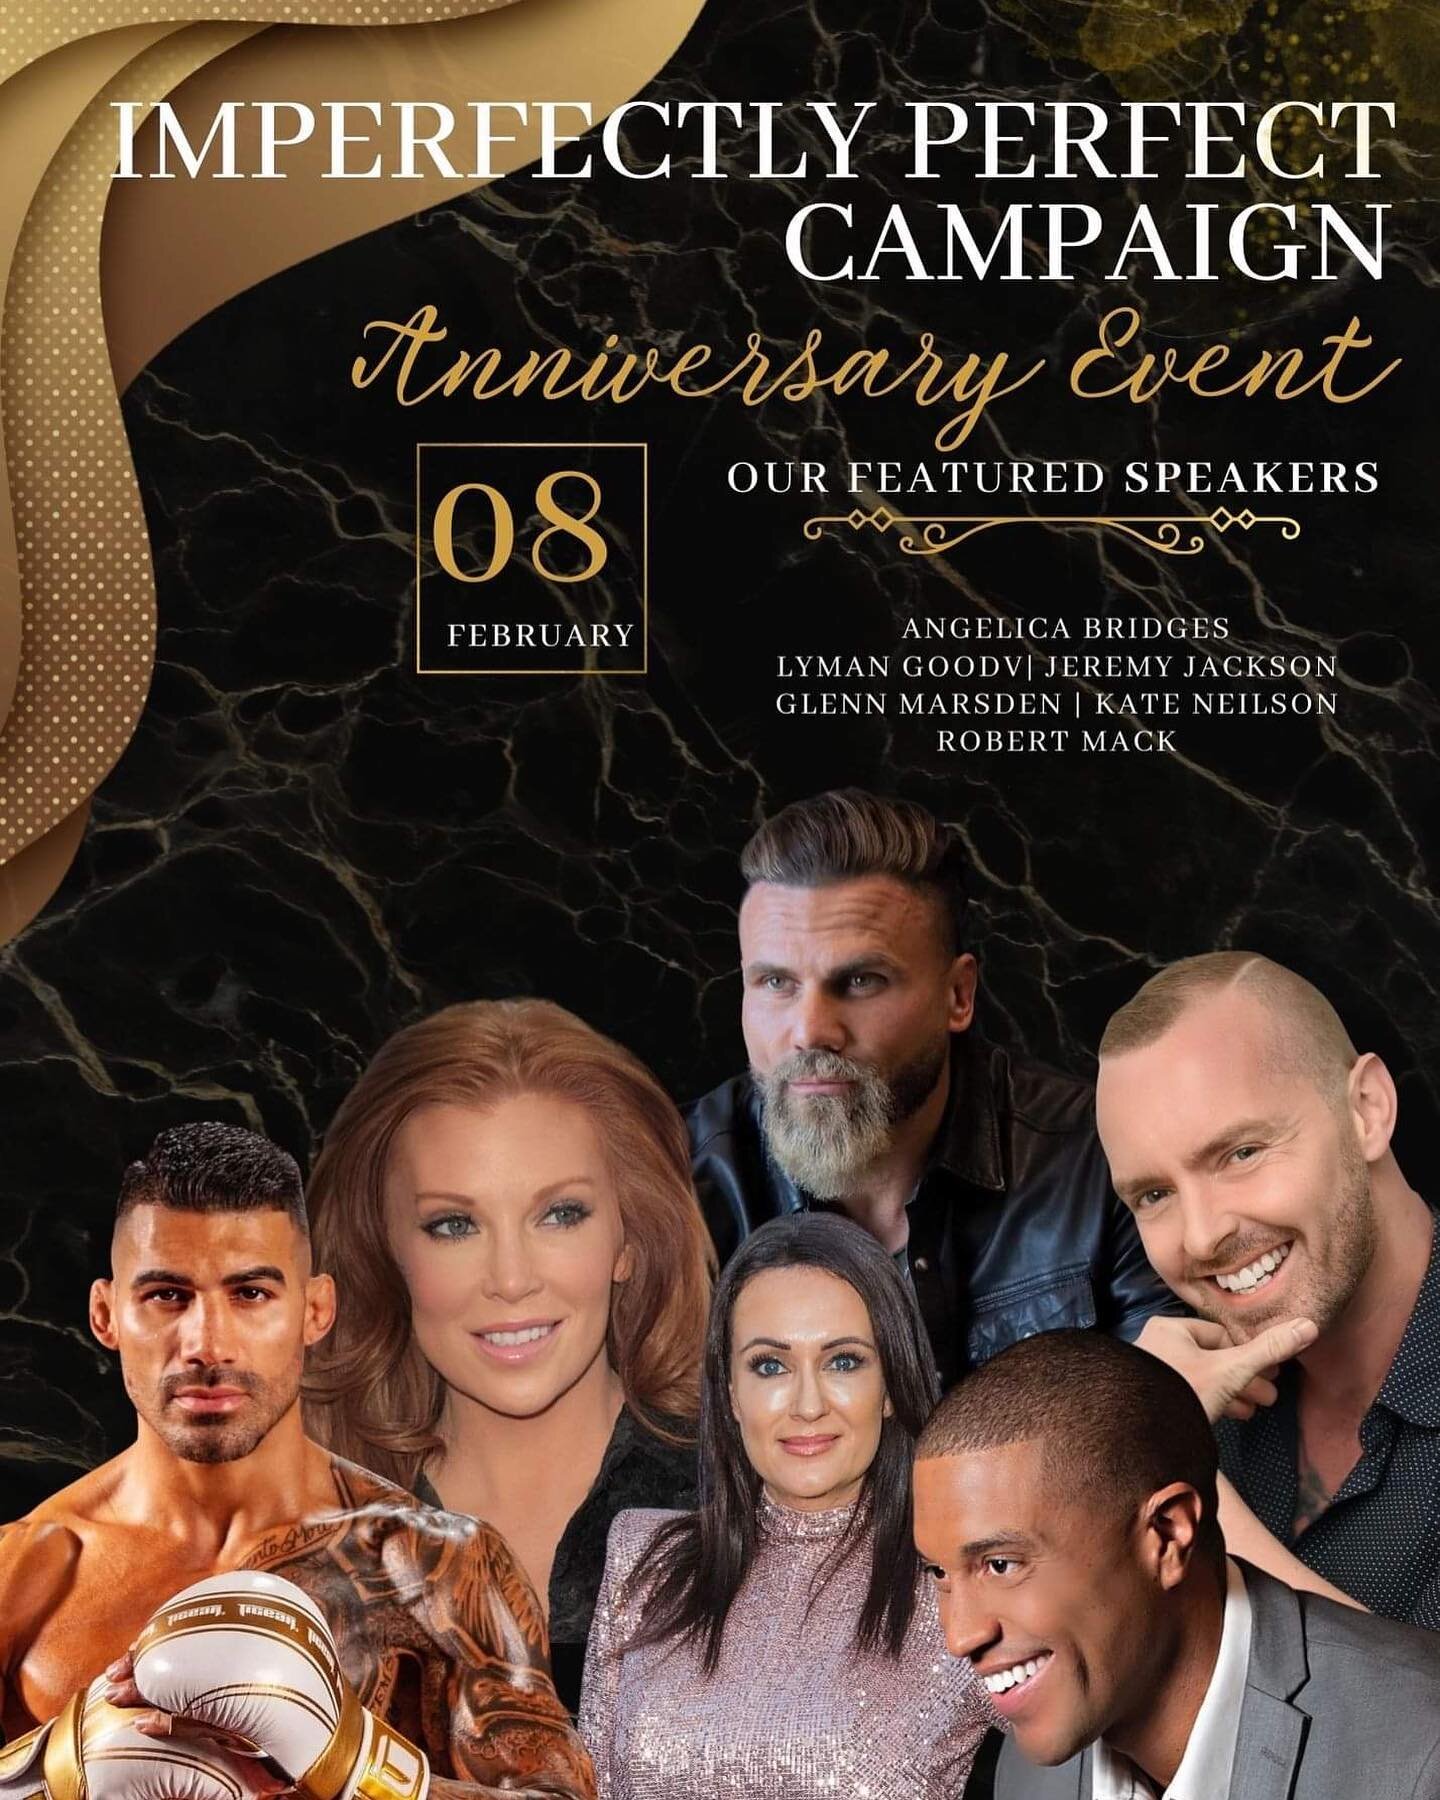 The Countdown has officially begun for the Imperfectly Perfect Campaign 5 Year VIP Anniversary Event in Los Angeles with featured speakers, including the amazing @angelicabridges @jeremyjacksonfitness @lymangoodmma @kateneilsonofficial @robmackoffici